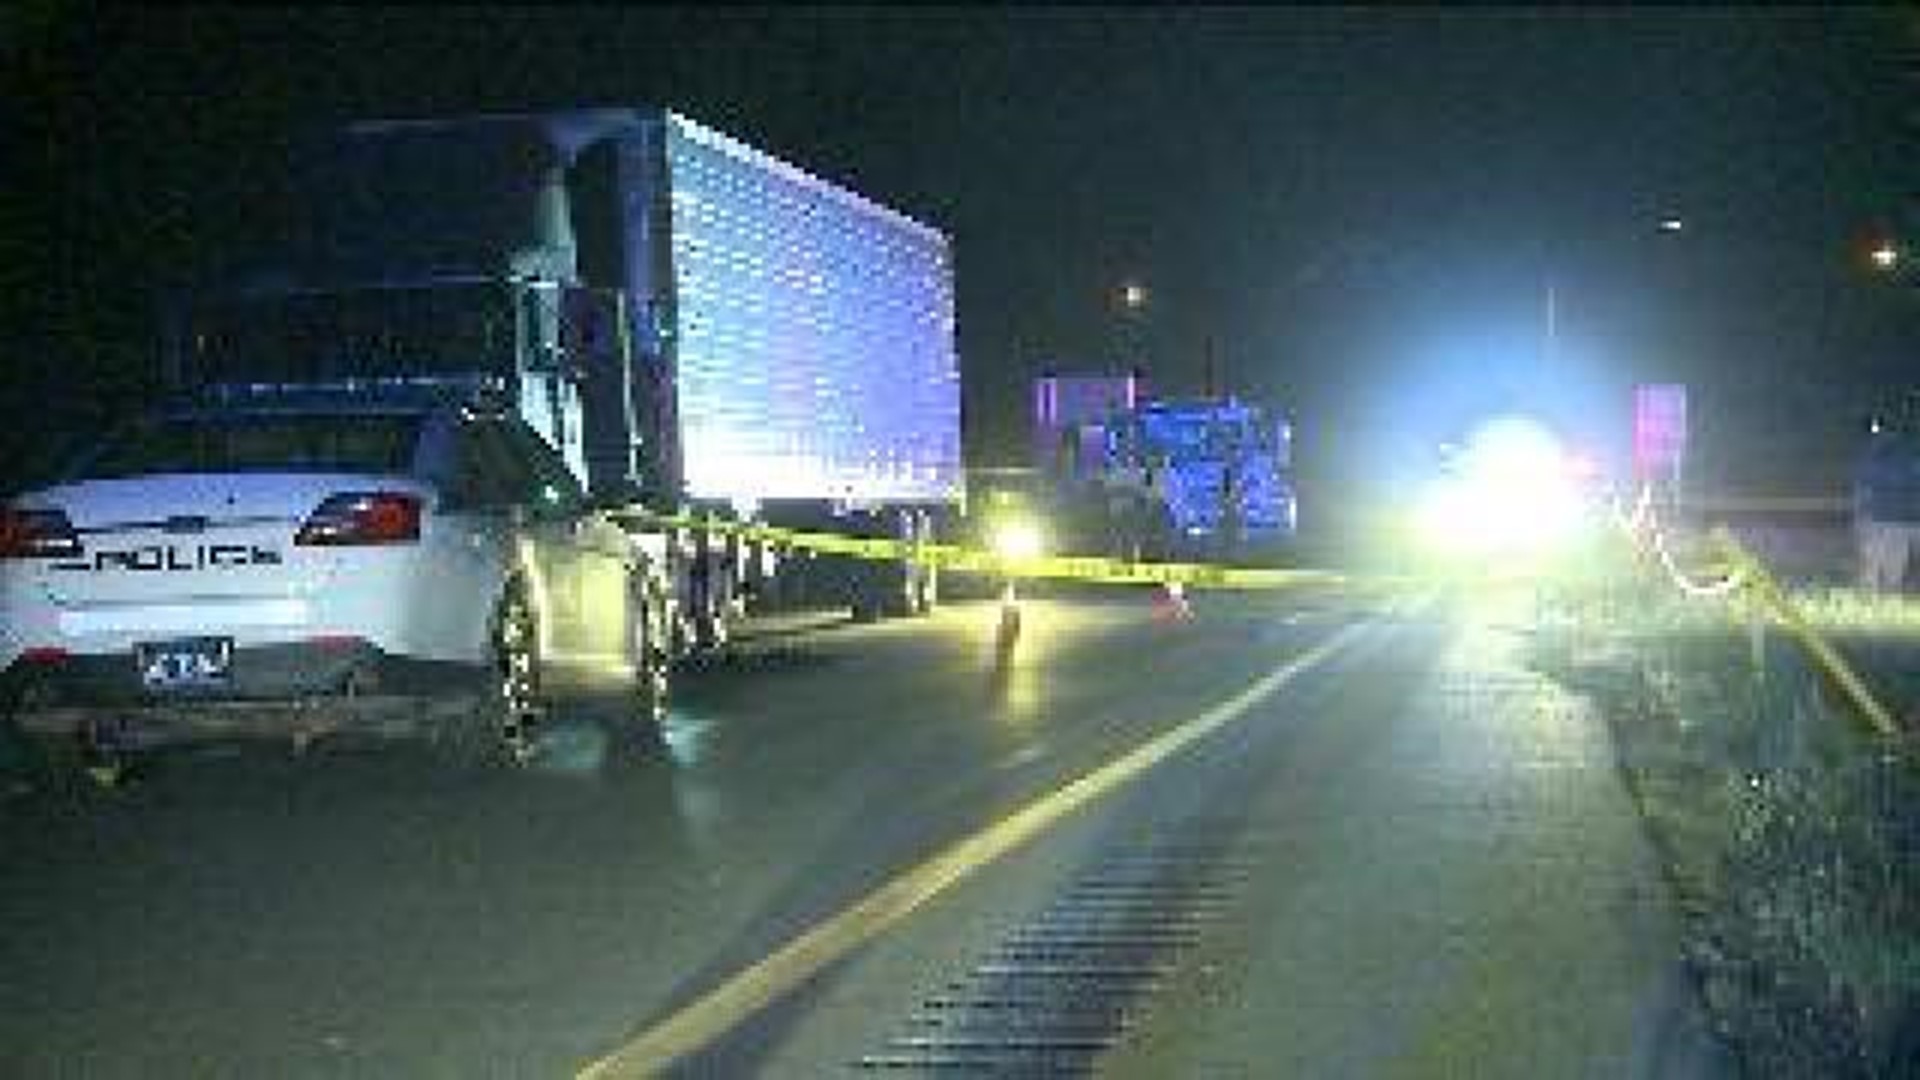 UPDATE: Trucker Attempts to Fight Cop, Gets Shot on I-80